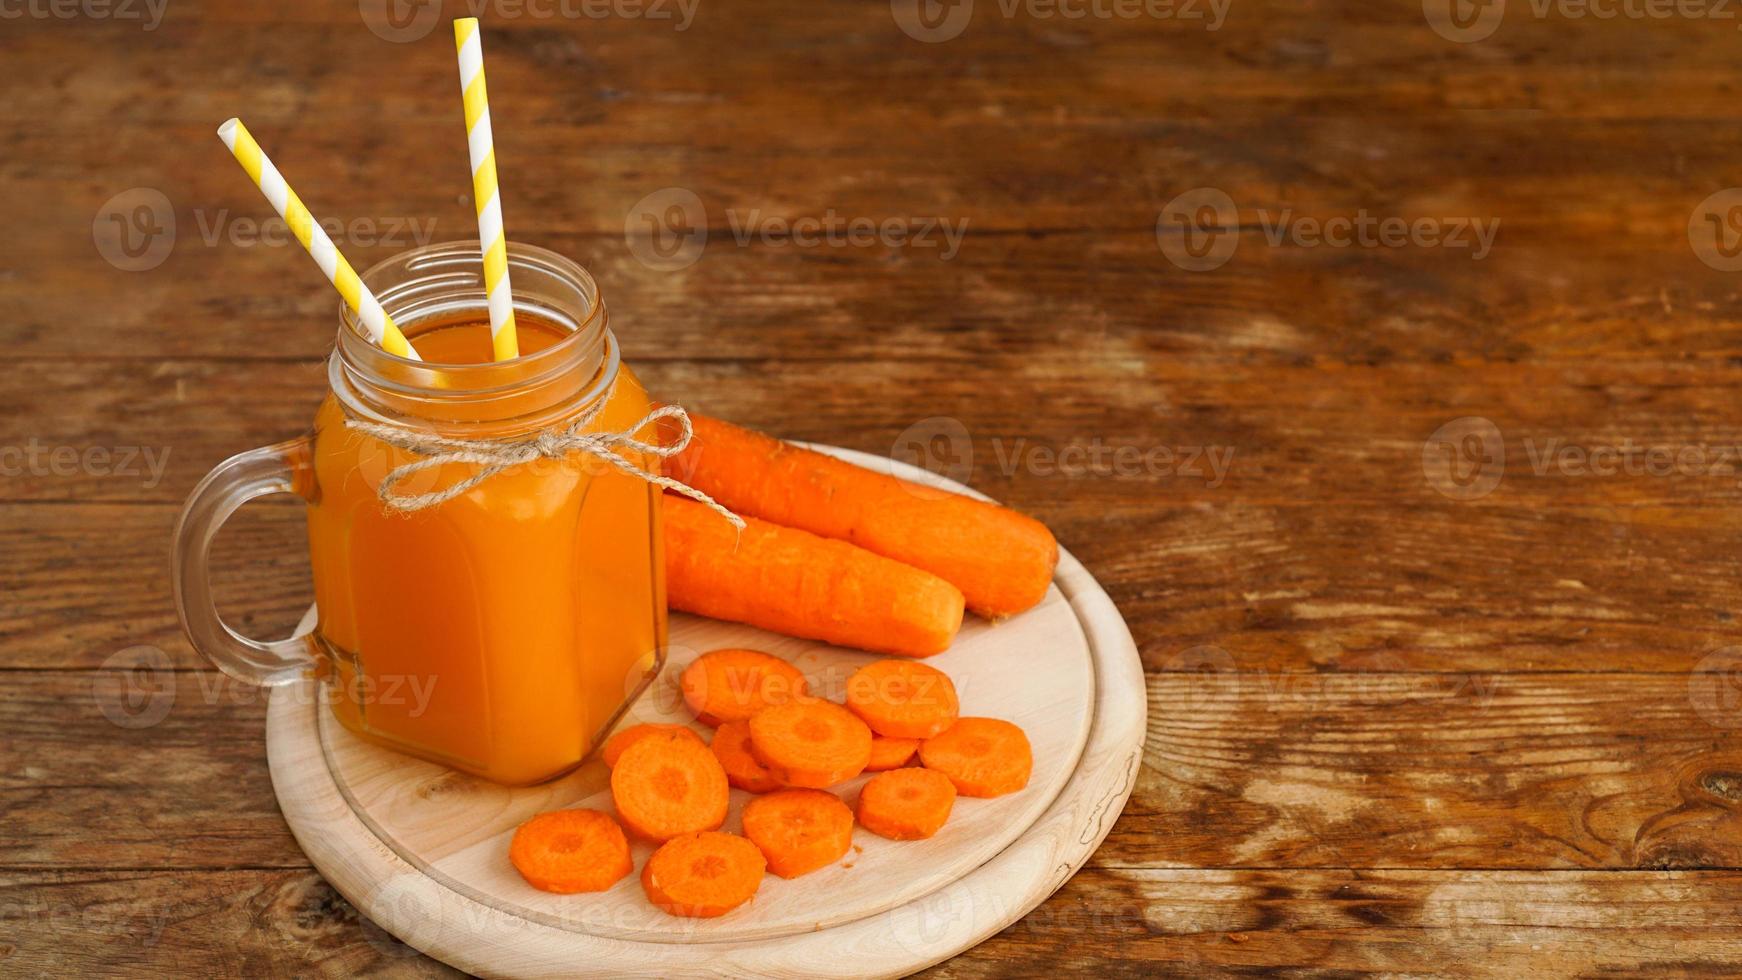 Bright orange carrot juice in a glass jar on a wooden background photo